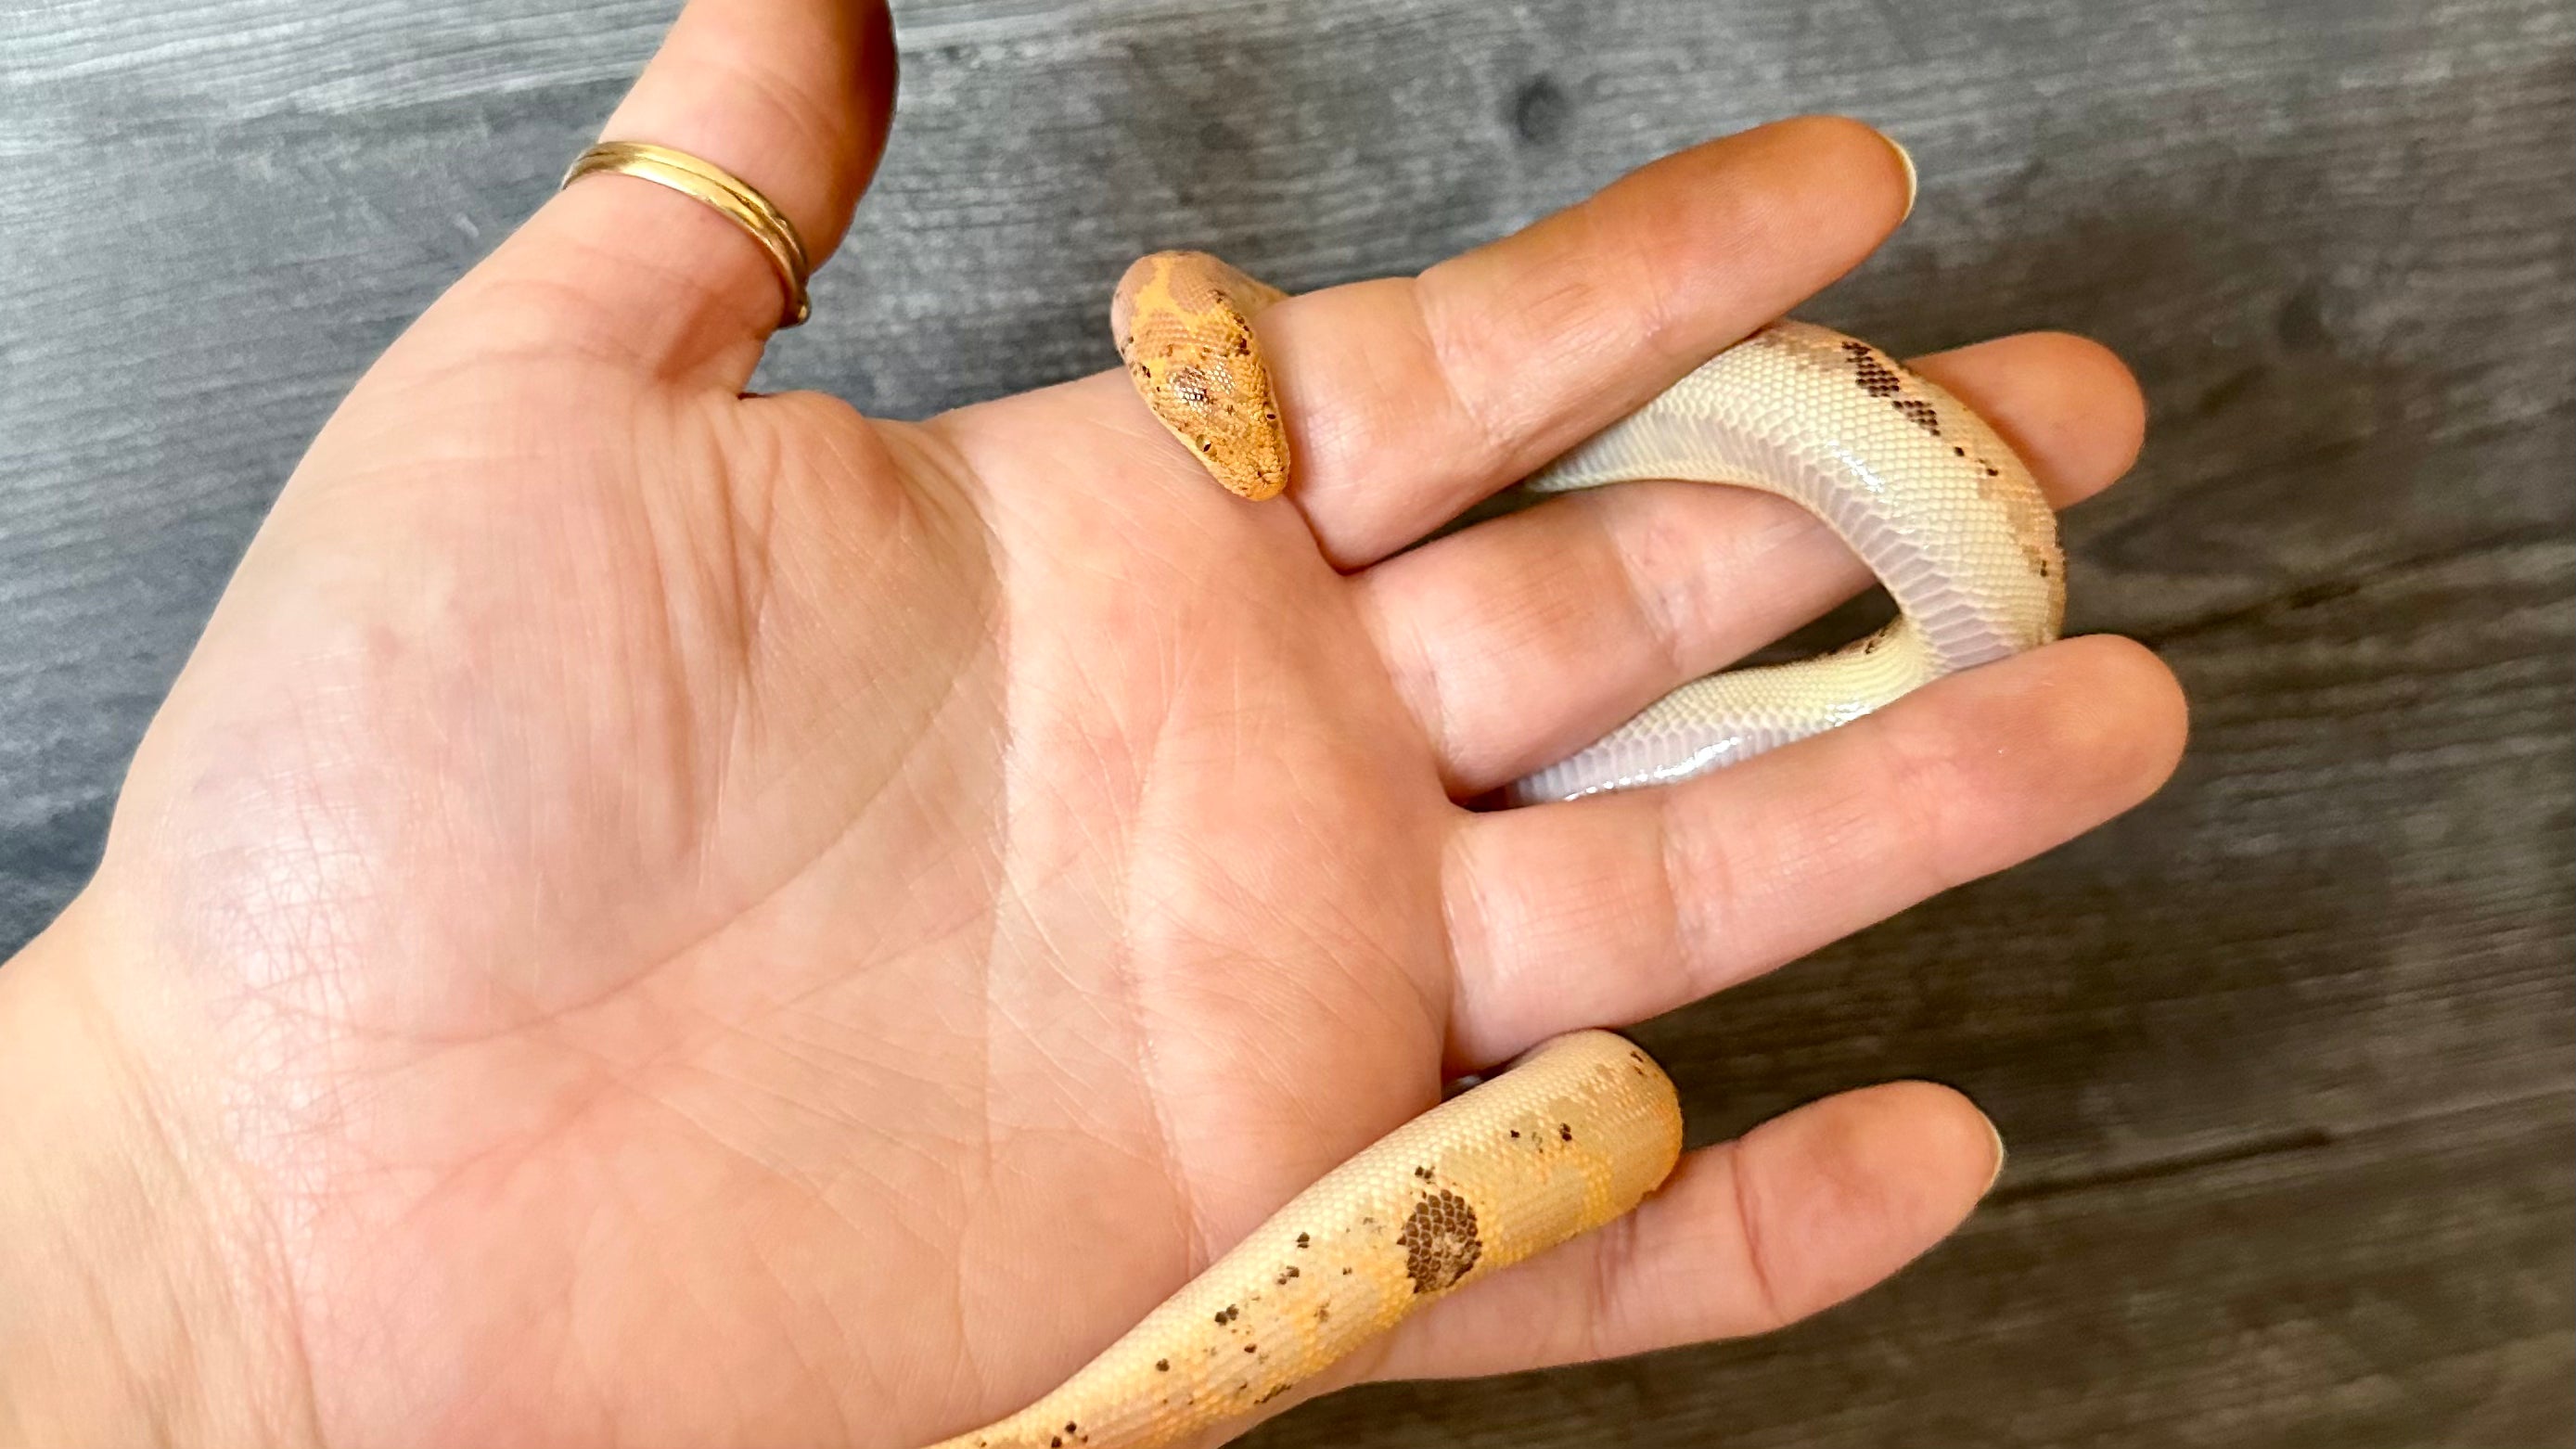 Load video: A paradox albino Kenyan sand boa in the palm of a hand. She is tan with orange stripe life markings/squiggles and she has random black spots all over her body.